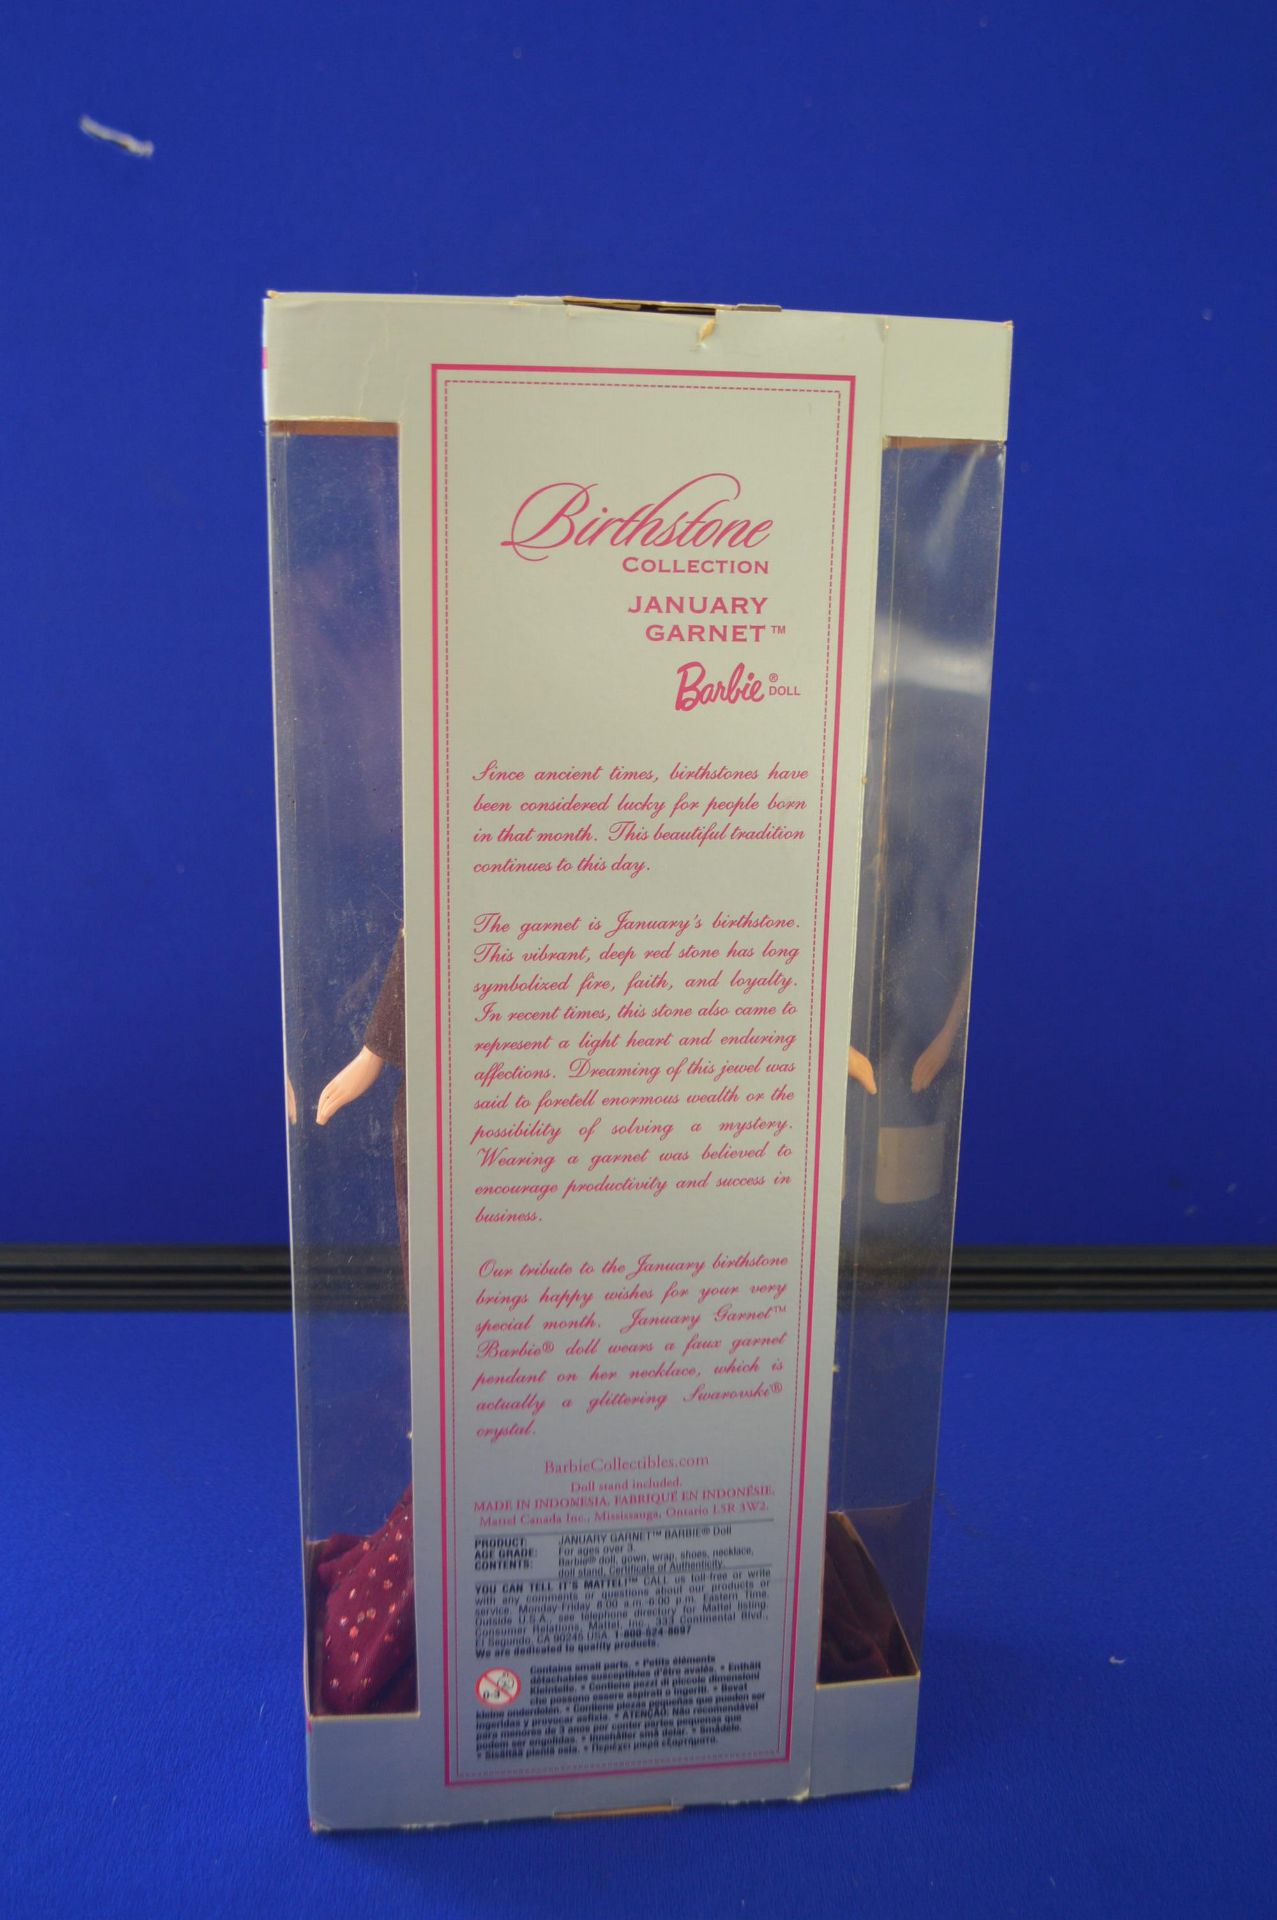 Barbie Birth Stone Collection January Garnet Doll - Image 3 of 3